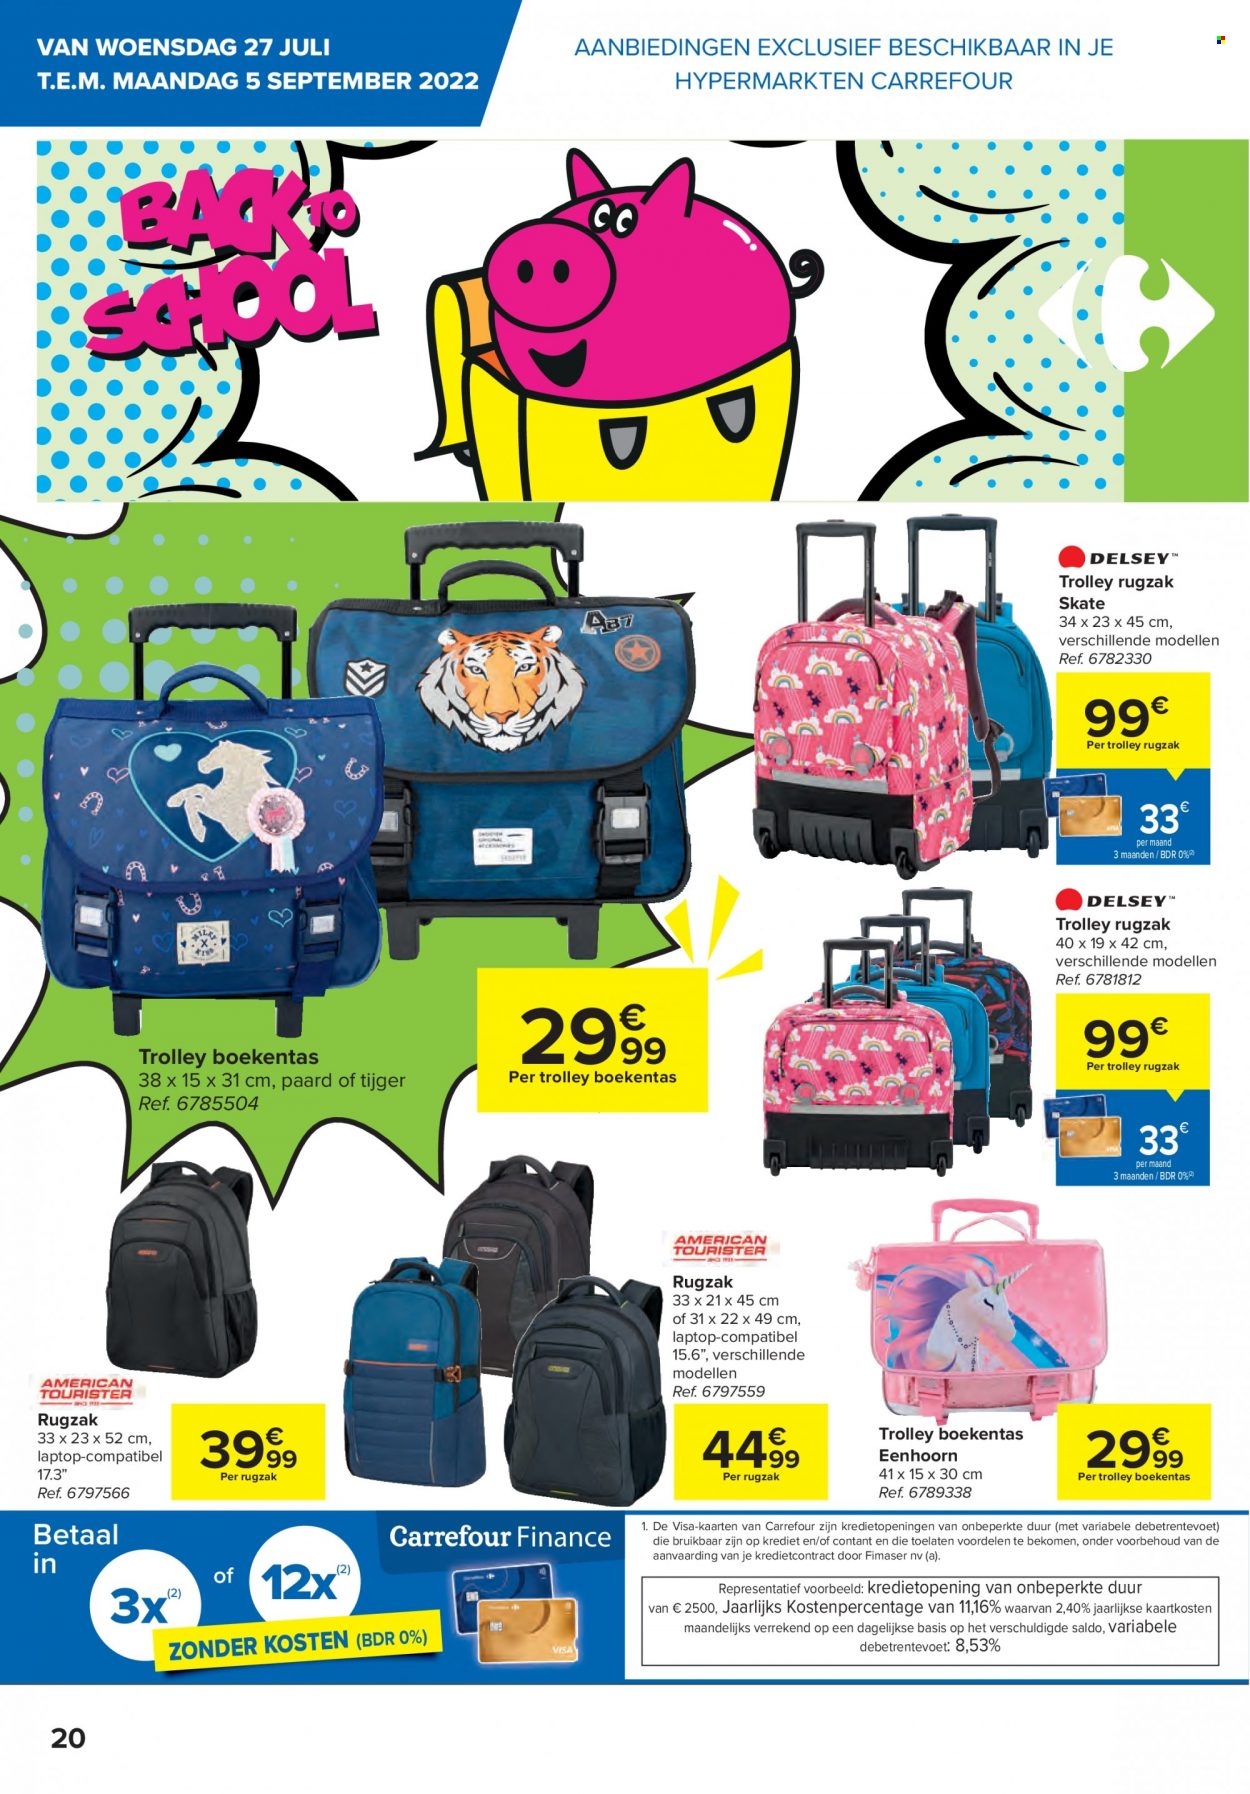 Catalogue Carrefour hypermarkt - 27.7.2022 - 5.9.2022. Page 20.